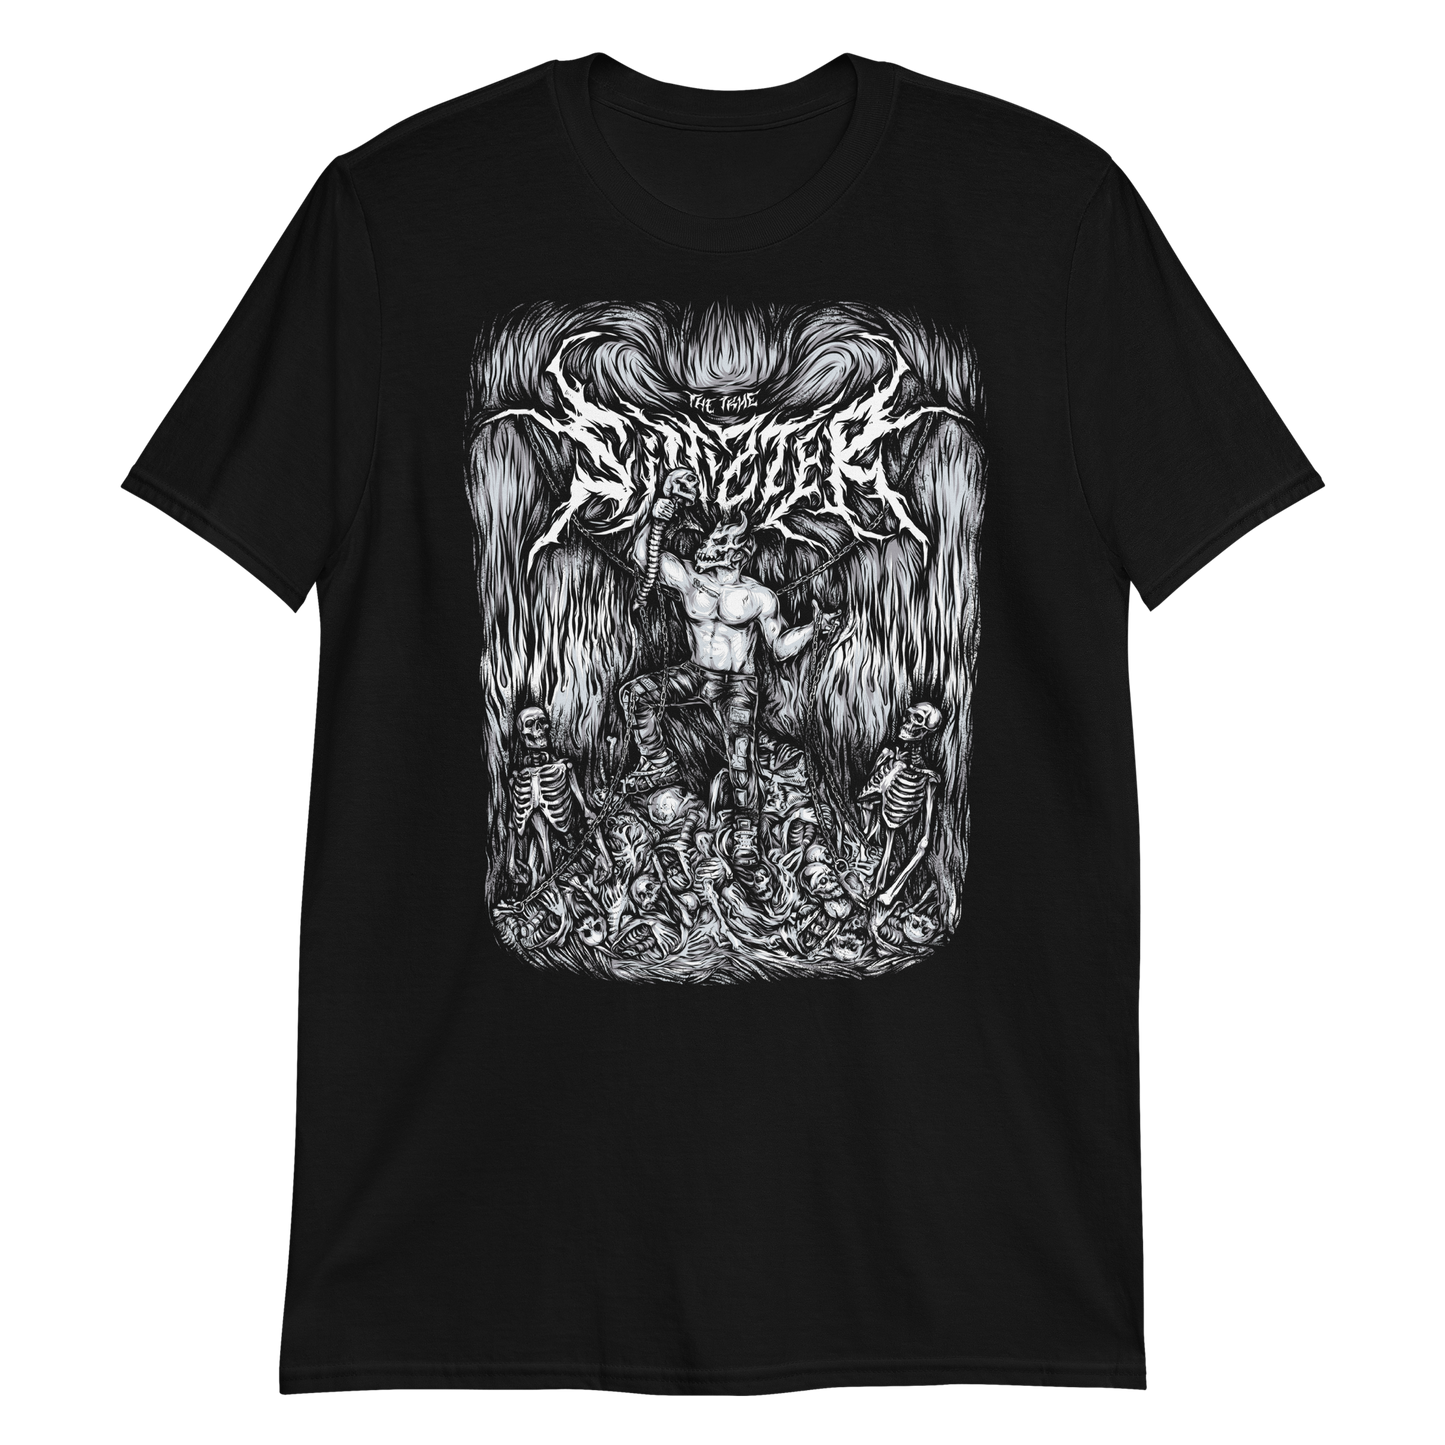 Sinizter "Surgical Extraction" T-Shirt